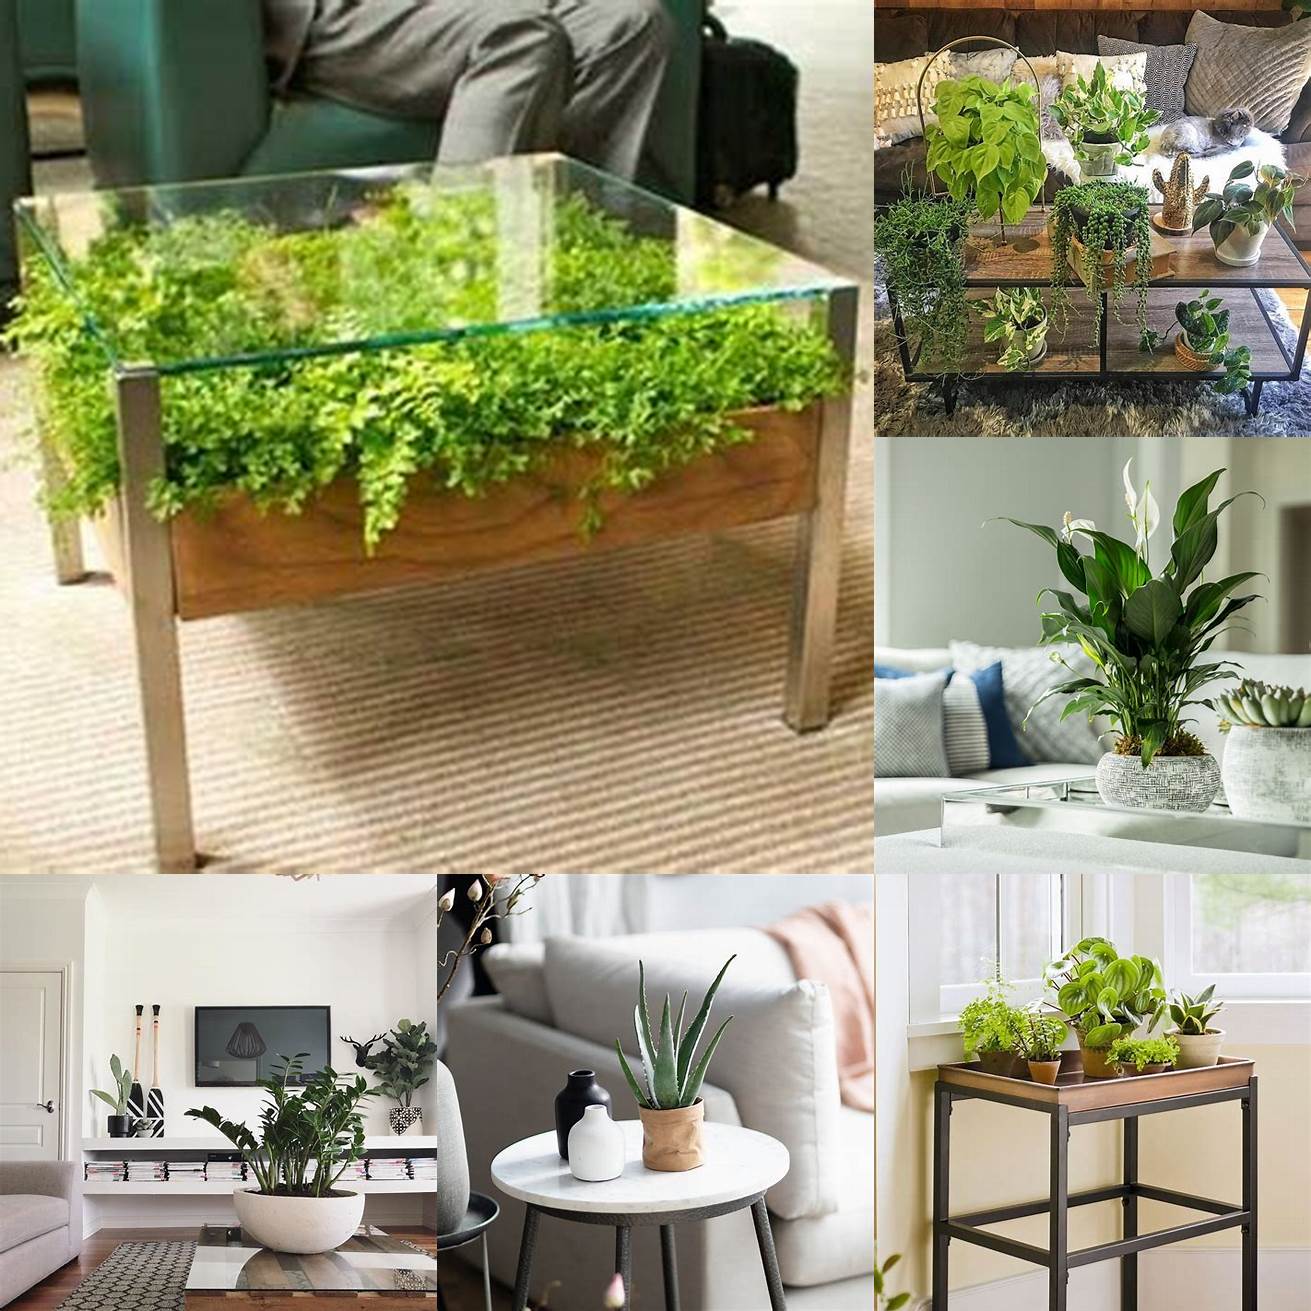 A coffee table with a plant on top